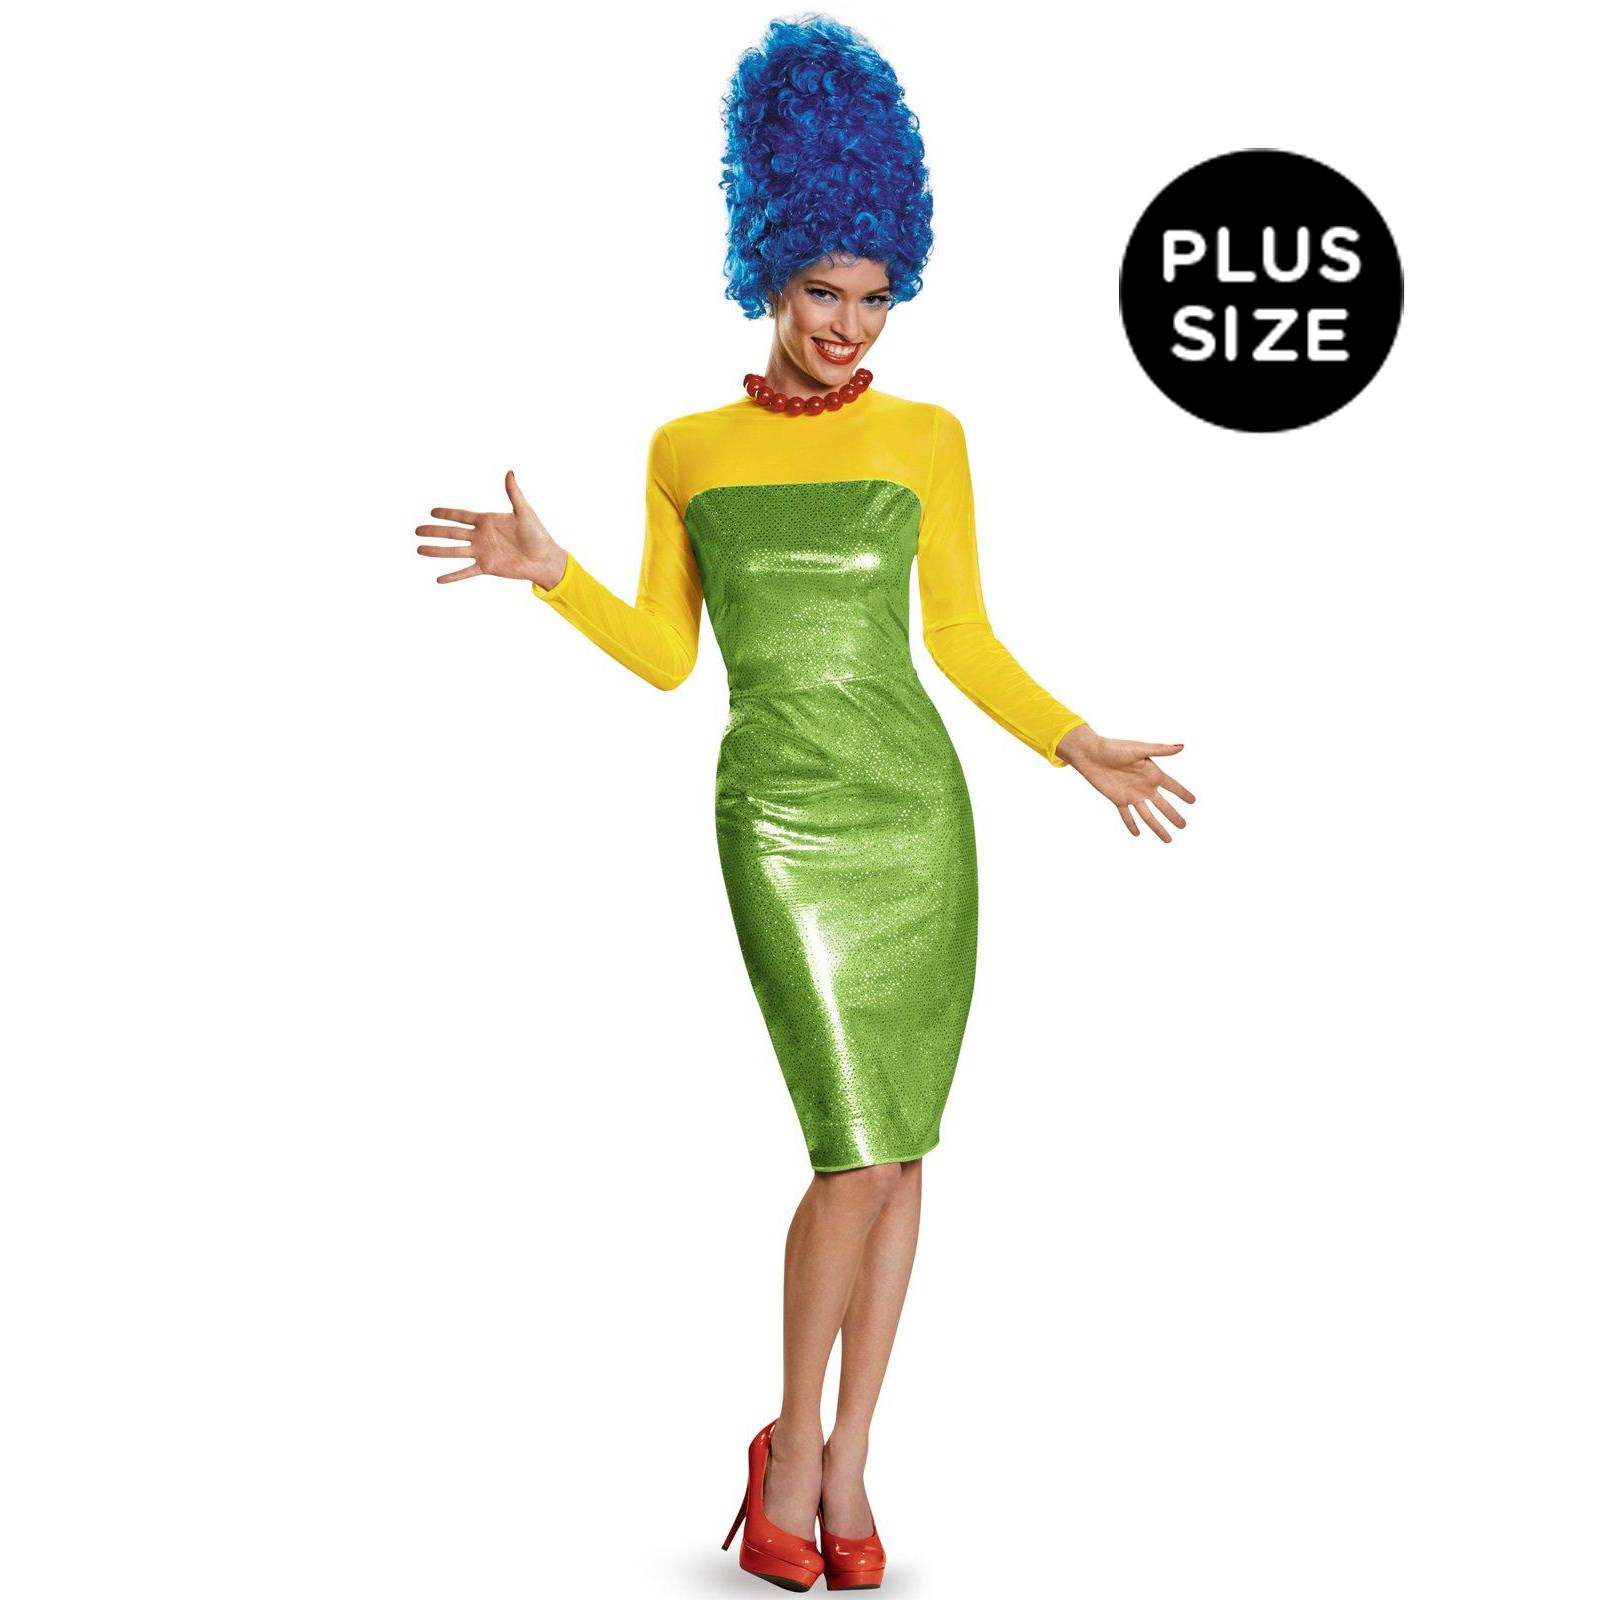 The Simpsons: Deluxe Plus Size Marge Costume For Women